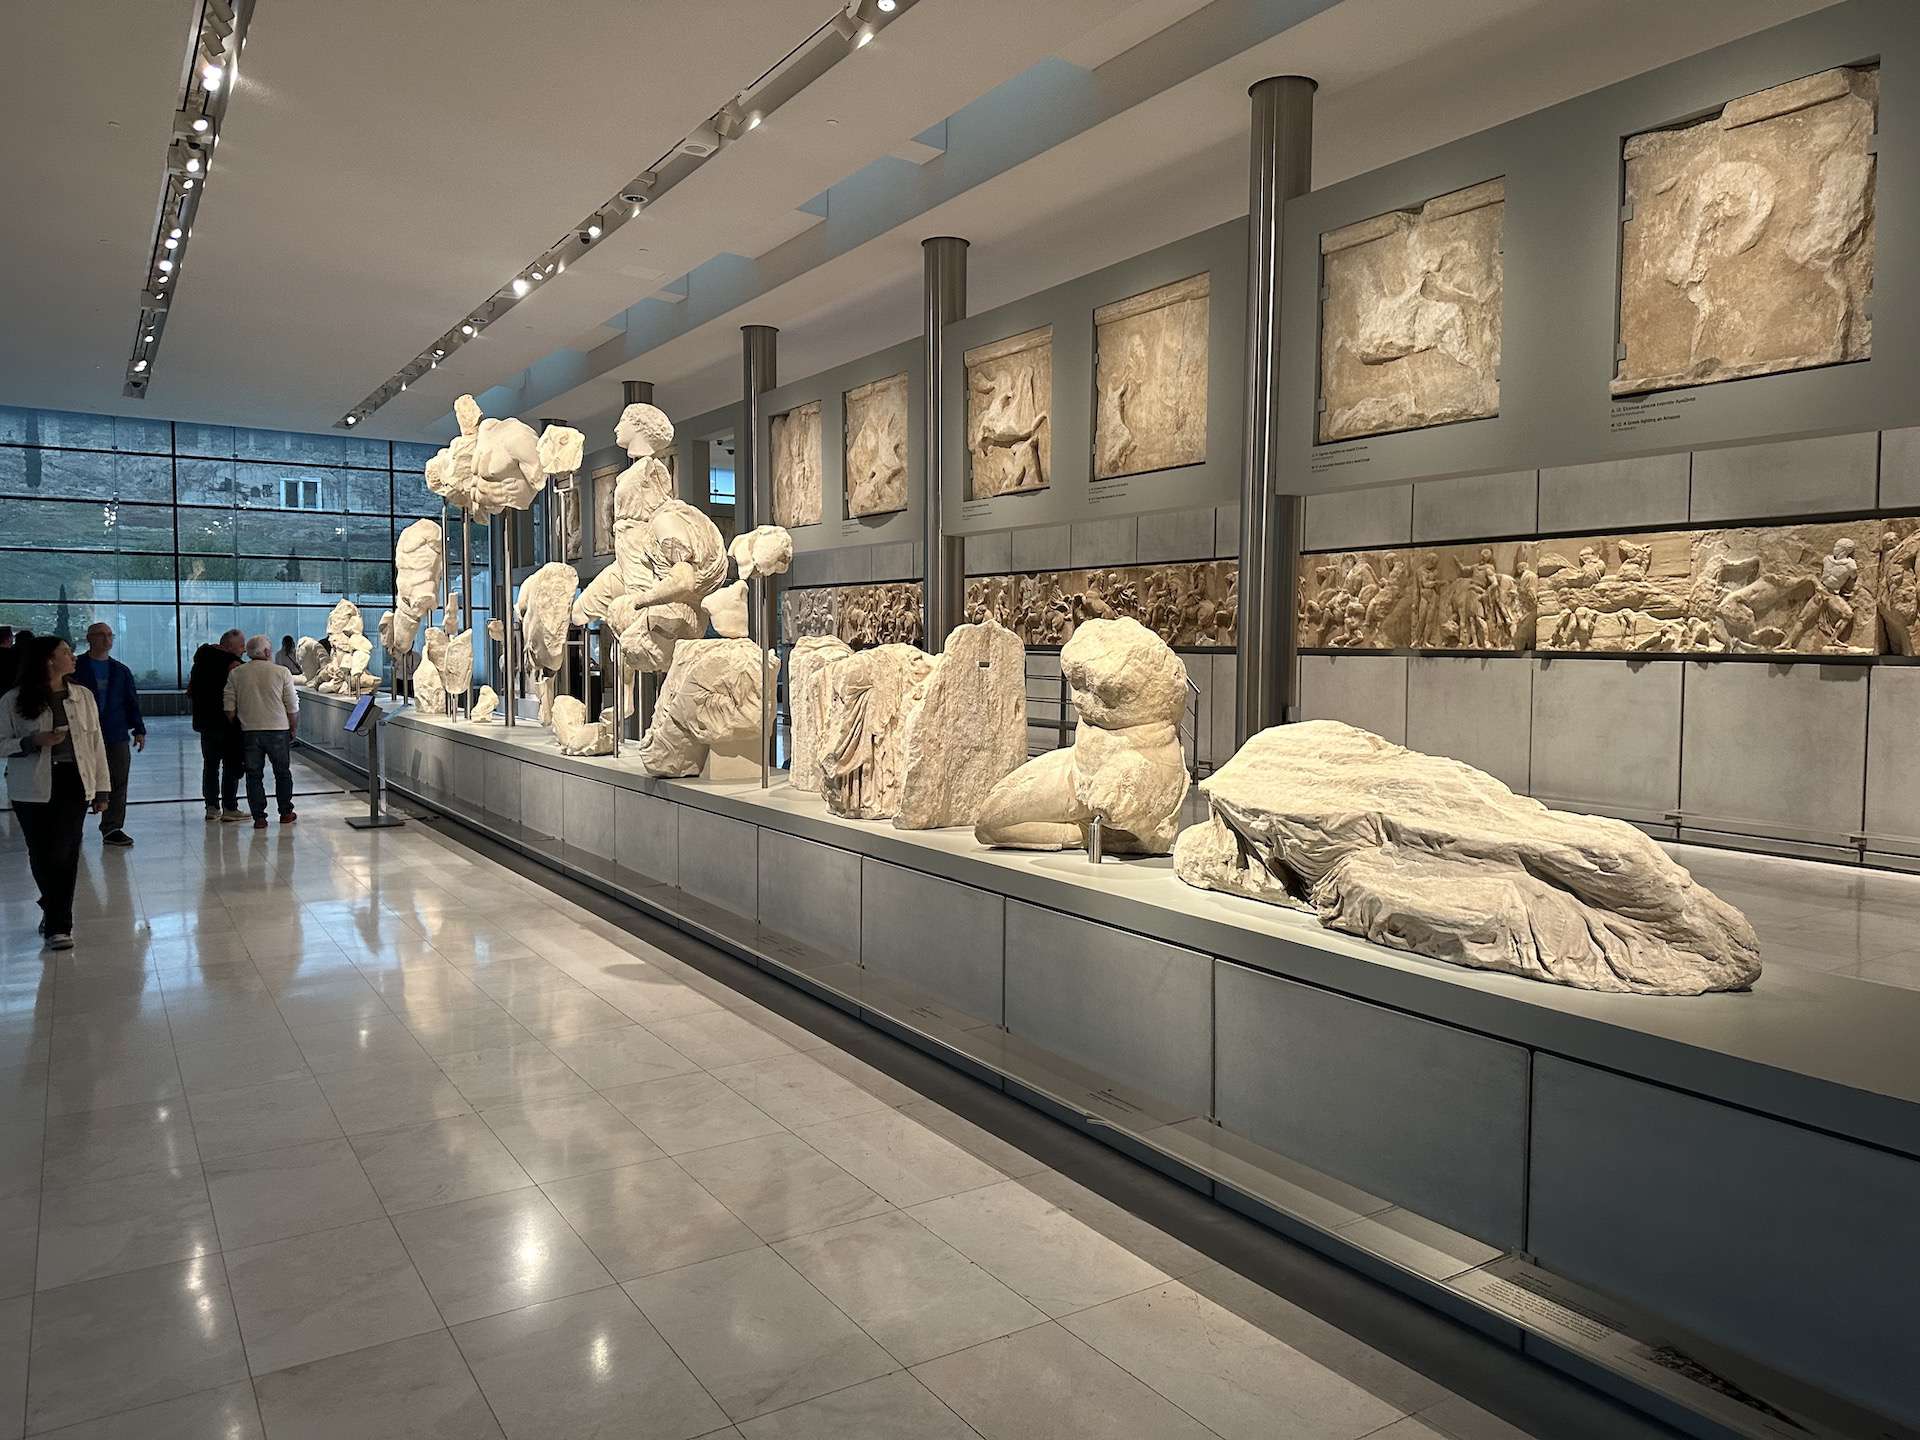 West pediment of the Parthenon at the Acropolis Museum in Athens, Greece